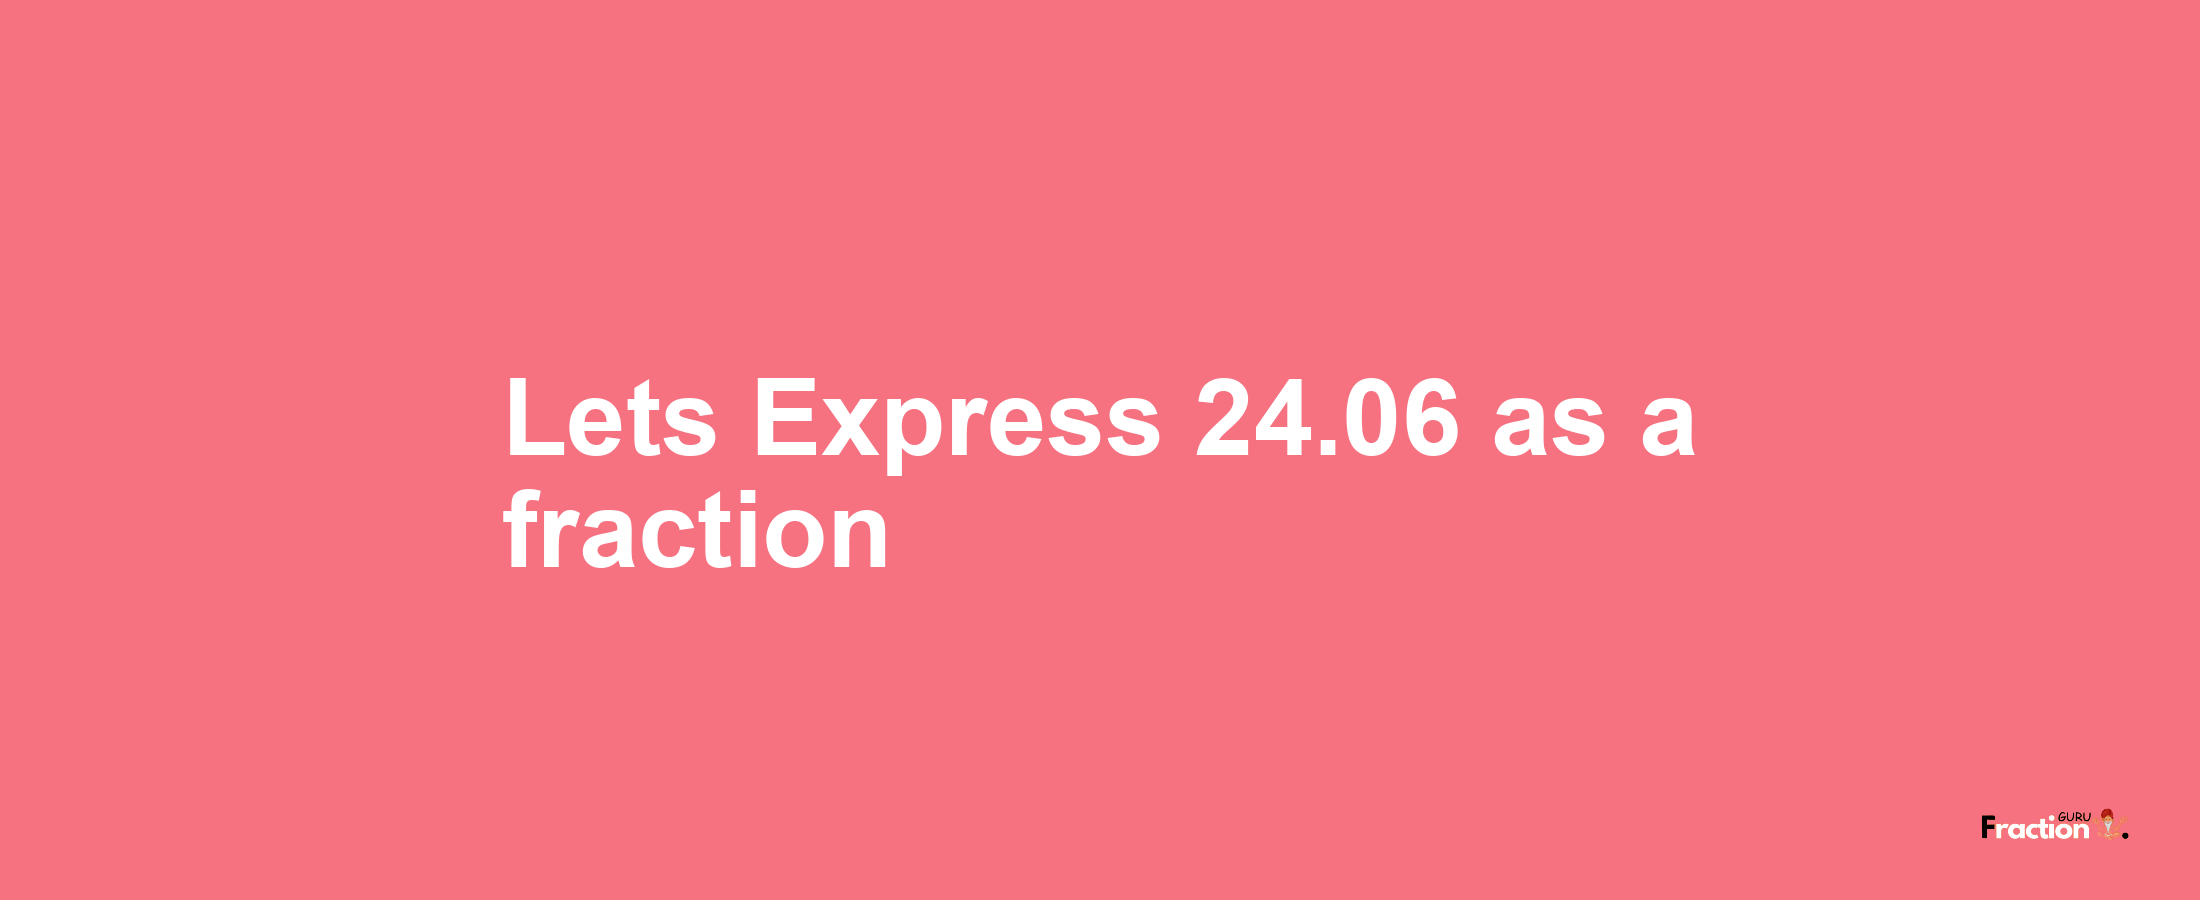 Lets Express 24.06 as afraction